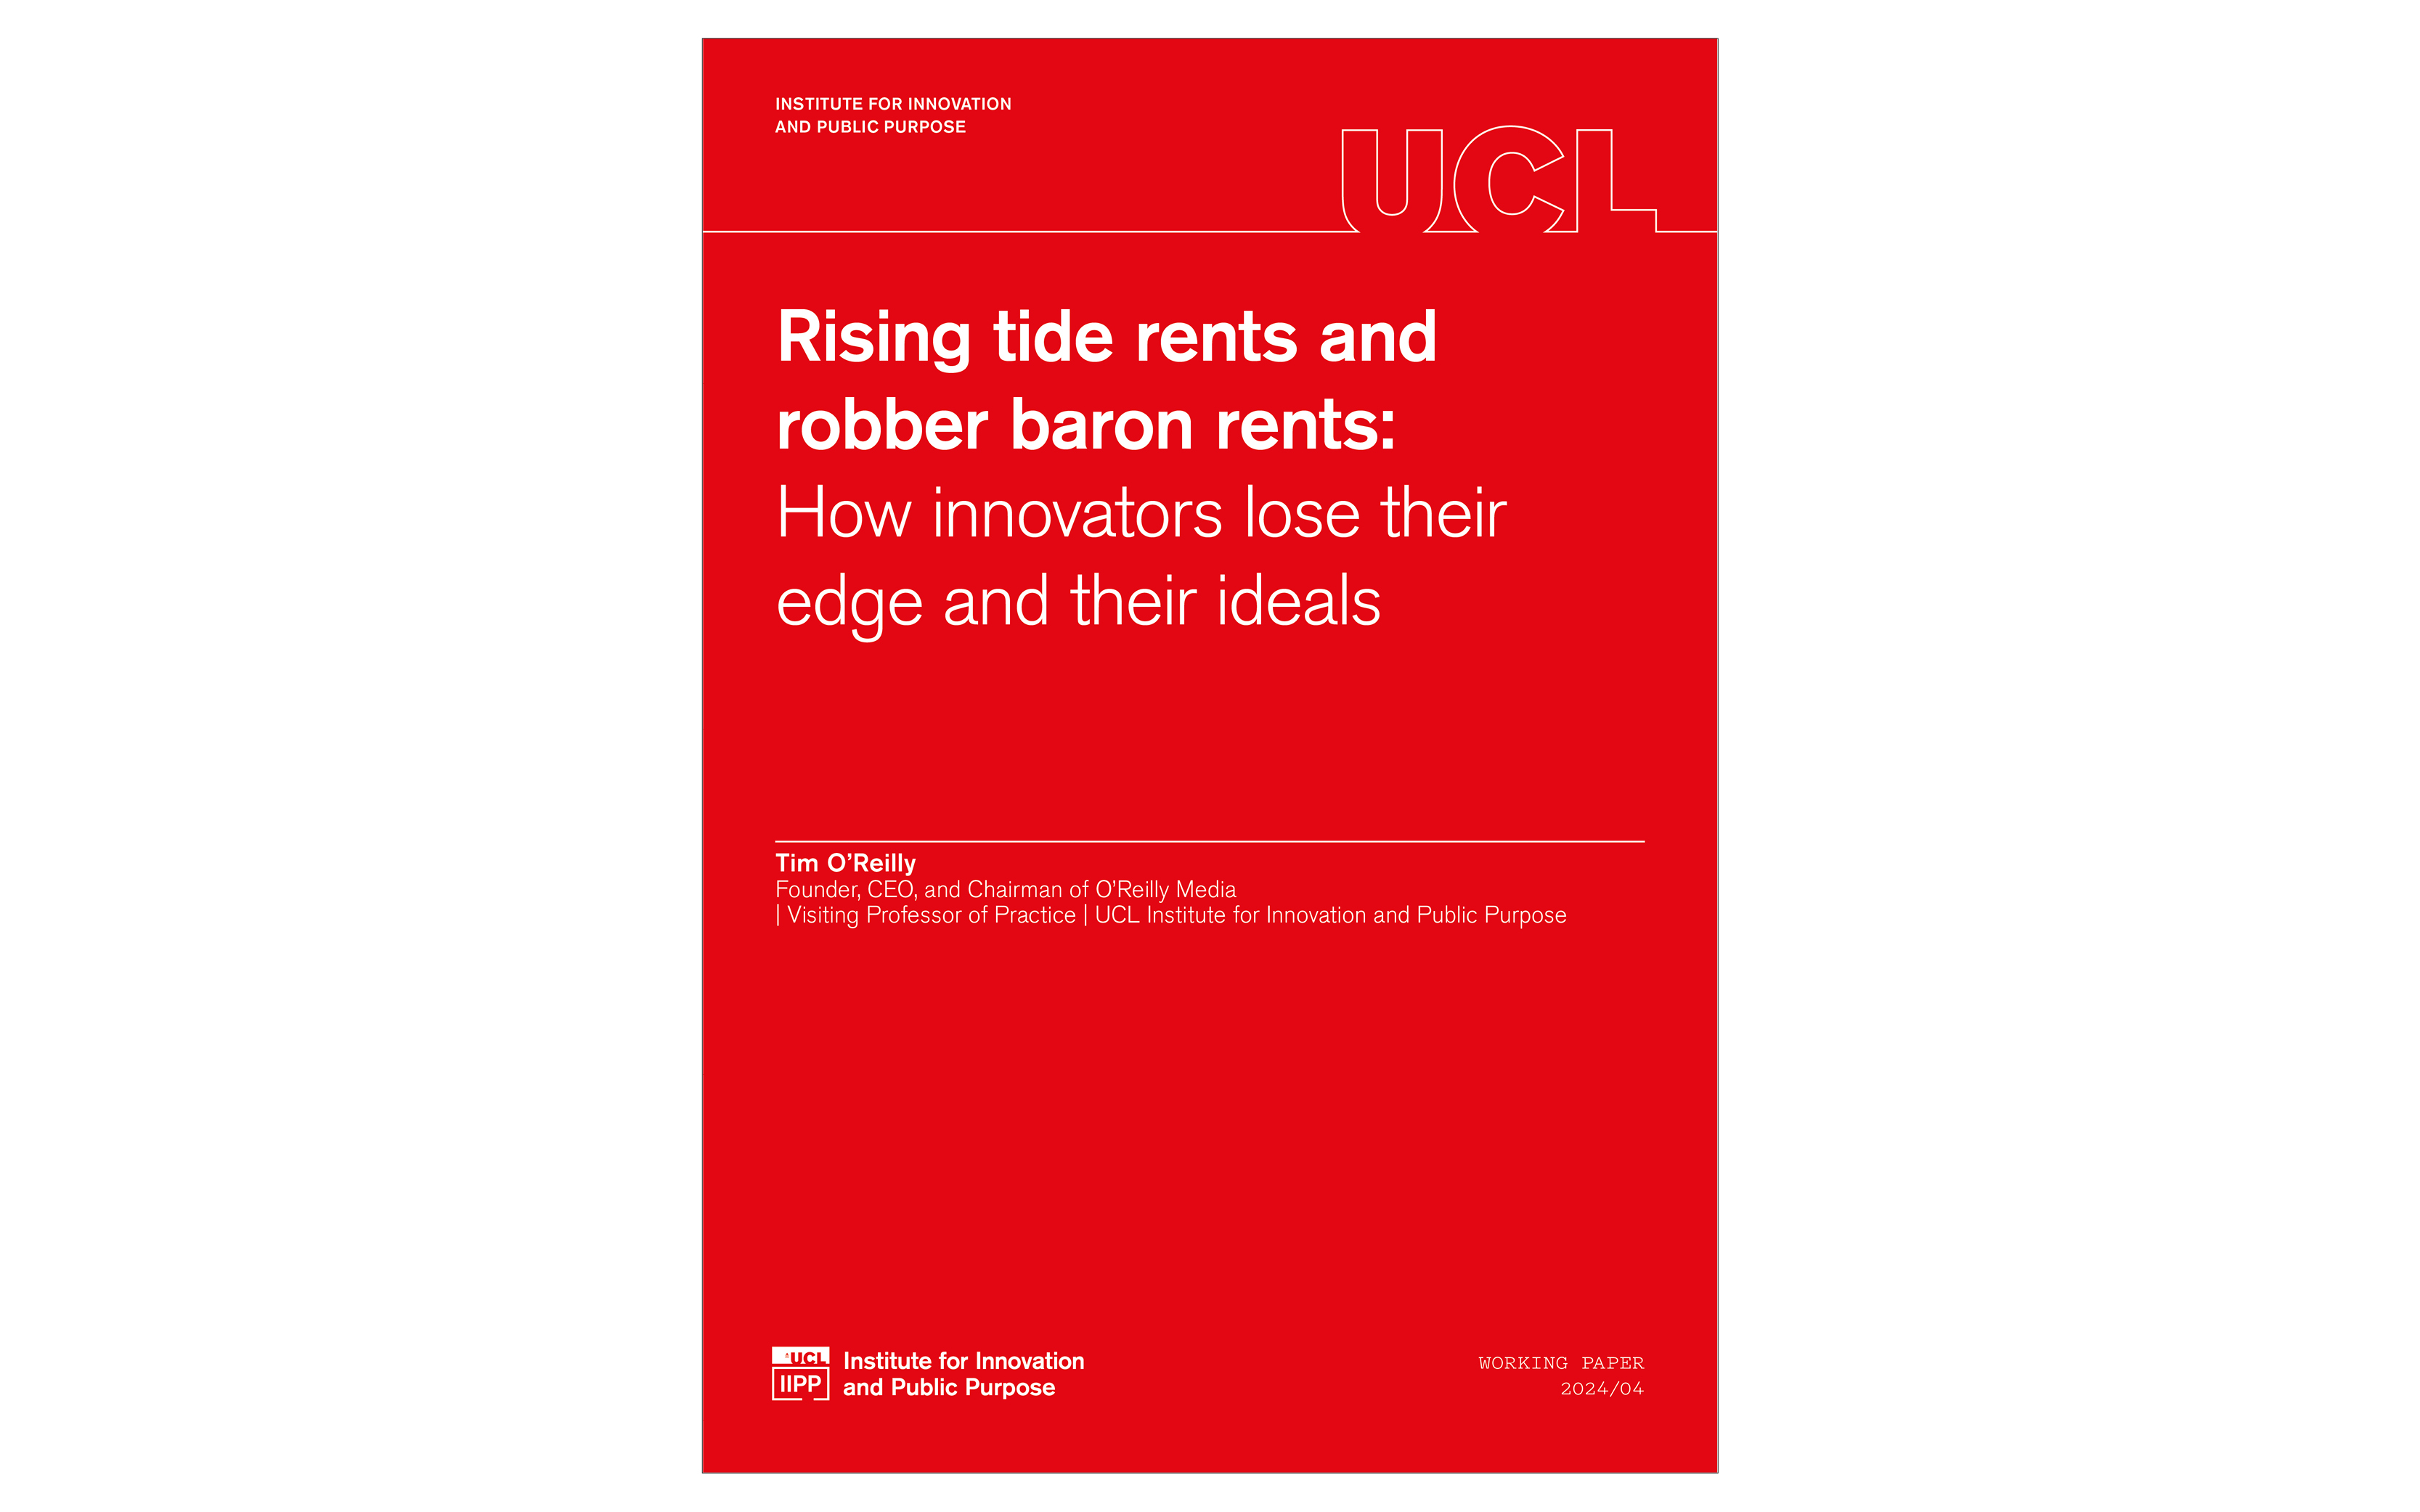 rising_tide_rents_and_robber_baron_rents-_how_innovators_lose_their_edge_and_their_ideals._ucl_institute_for_innovation_and_public_purpose_working_paper_series_iipp_wp_2024-04